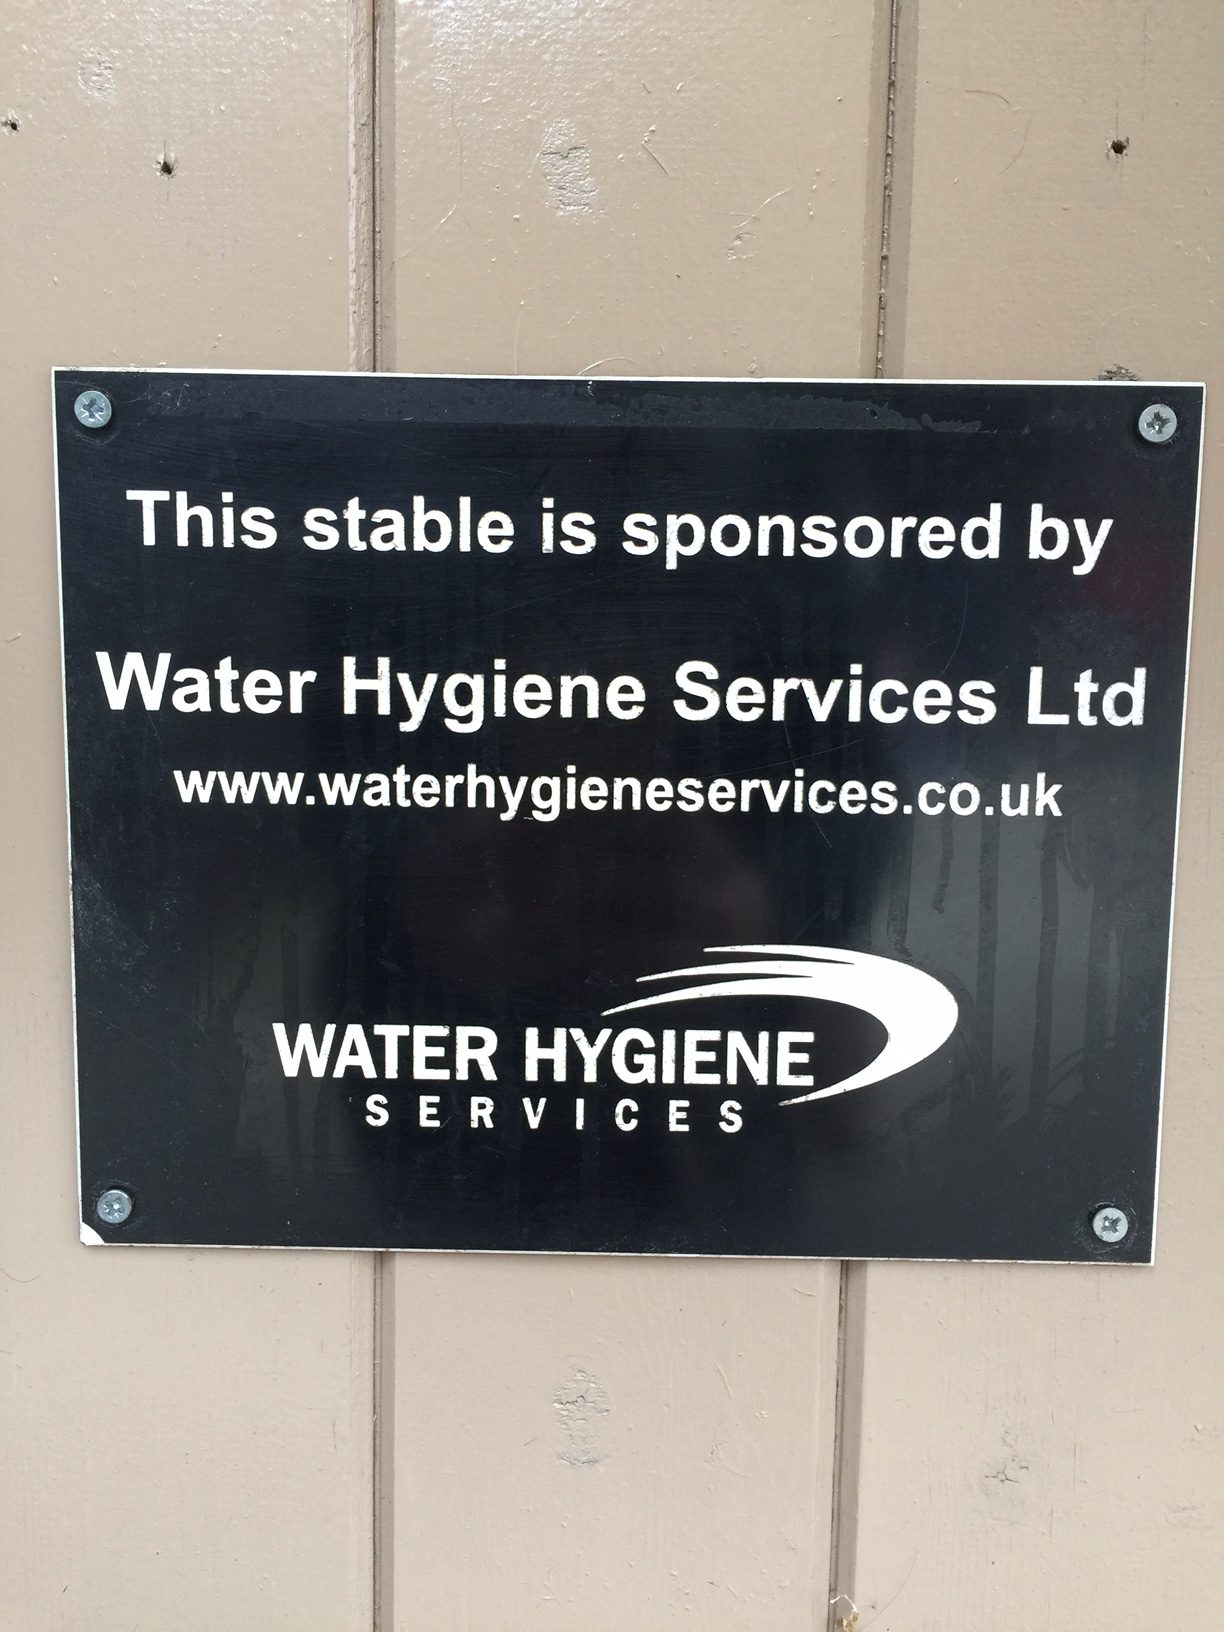 Hope Pastures sponsored by Water Hygiene Services